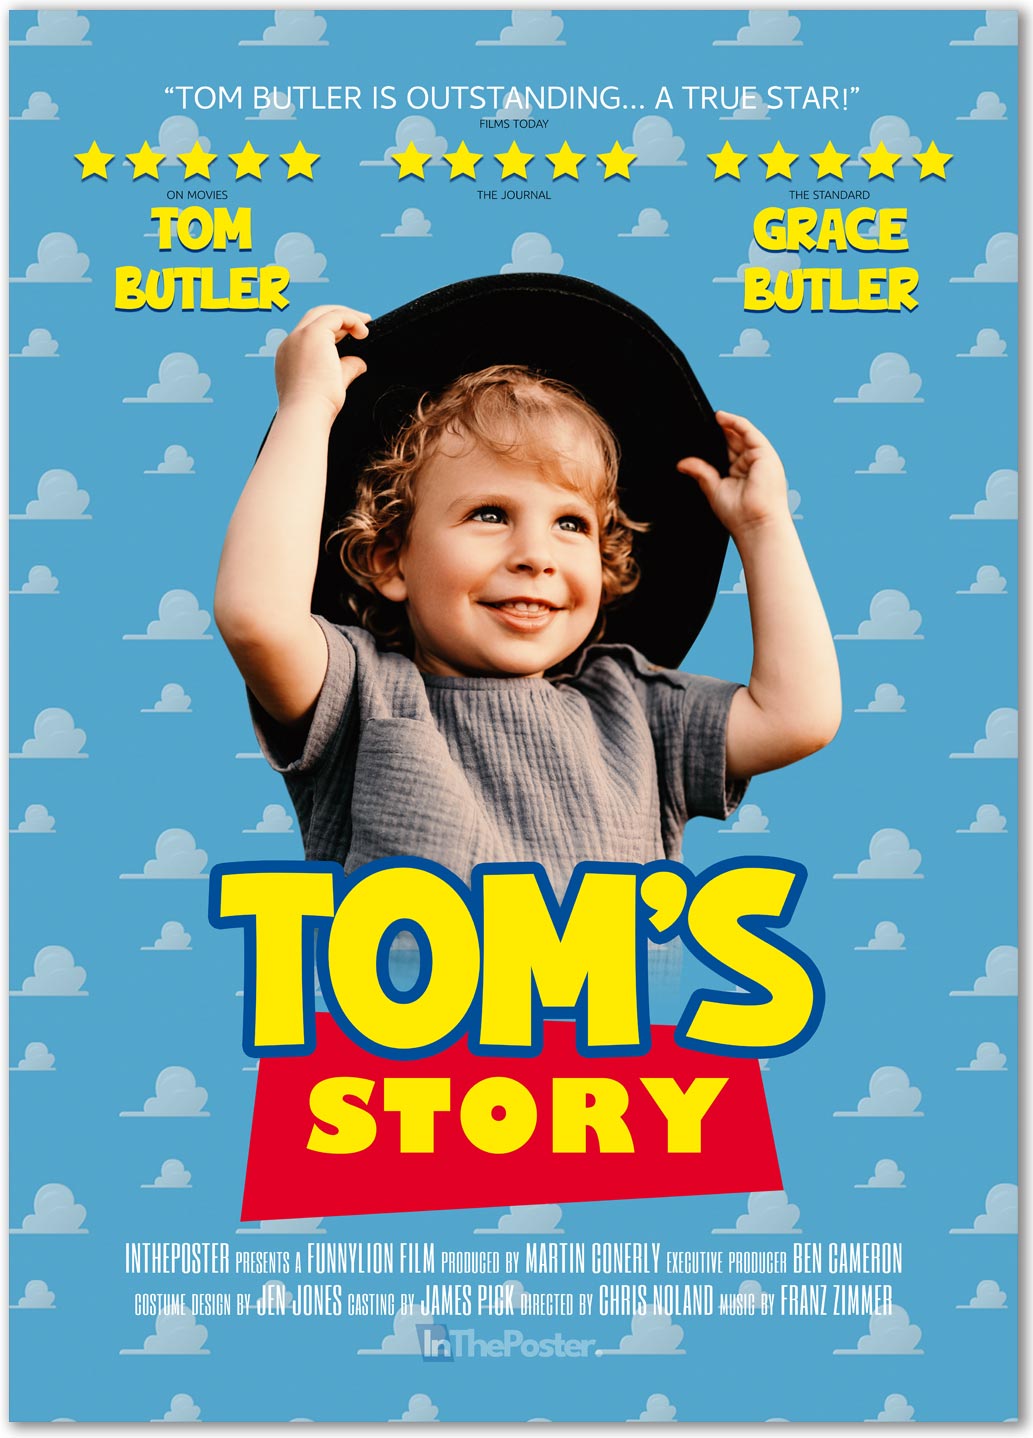 Classic Animated Film Inspired Movie Poster with blue clouds and a happy body wearing a cowboy hat. Yellow text saying 'Tom's Story'.